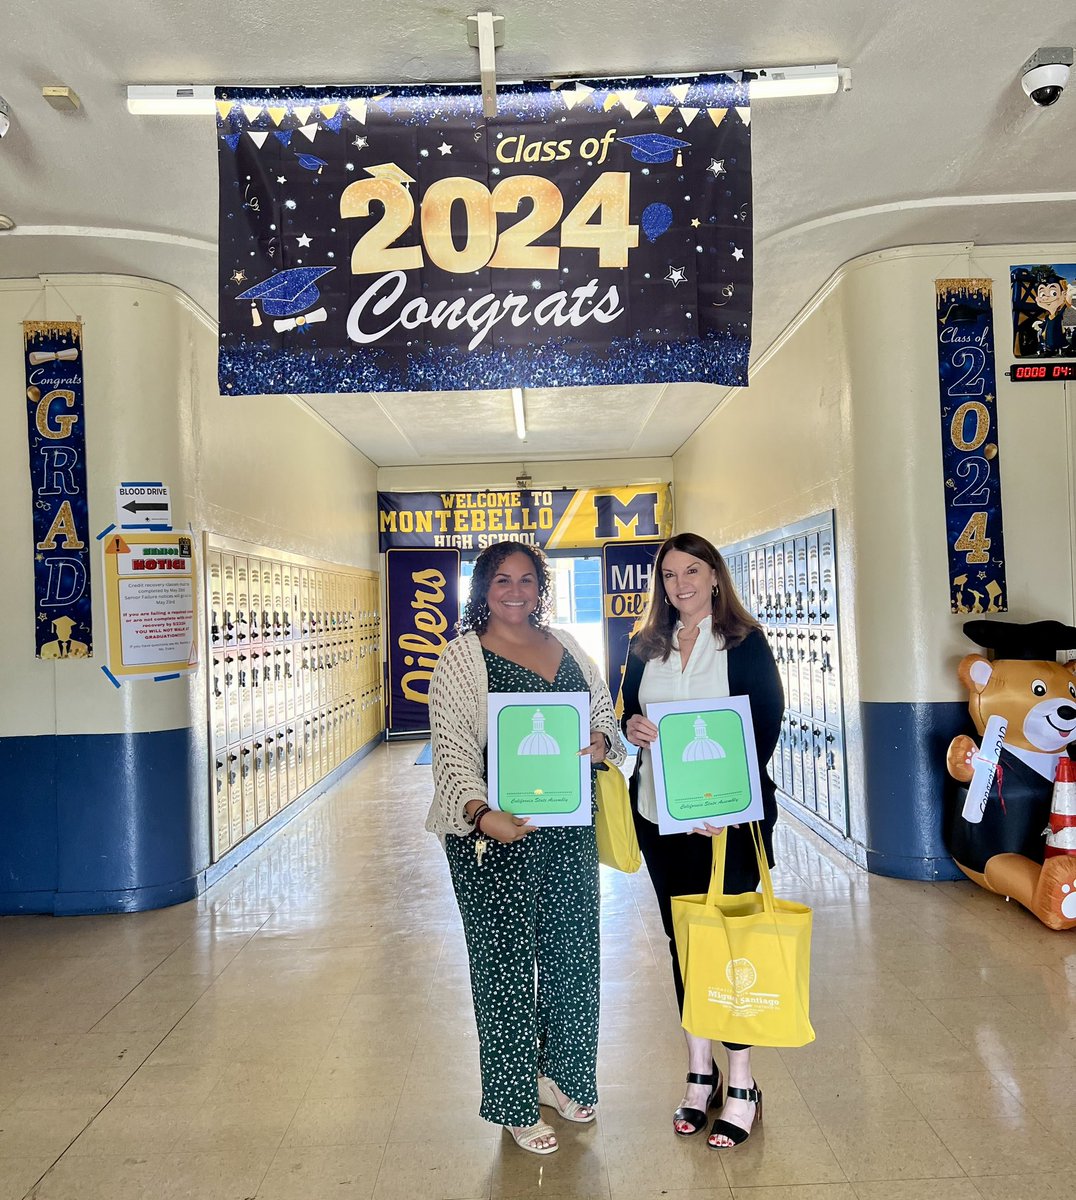 Next stop to drop off certificates to celebrate our graduating seniors is Montebello High School! 👩🏽‍🎓👨🏽‍🎓🏫🎓

 Wishing you tons of success! You got this 👏🏽👏🏽👏🏽

#AD54 #Montebello